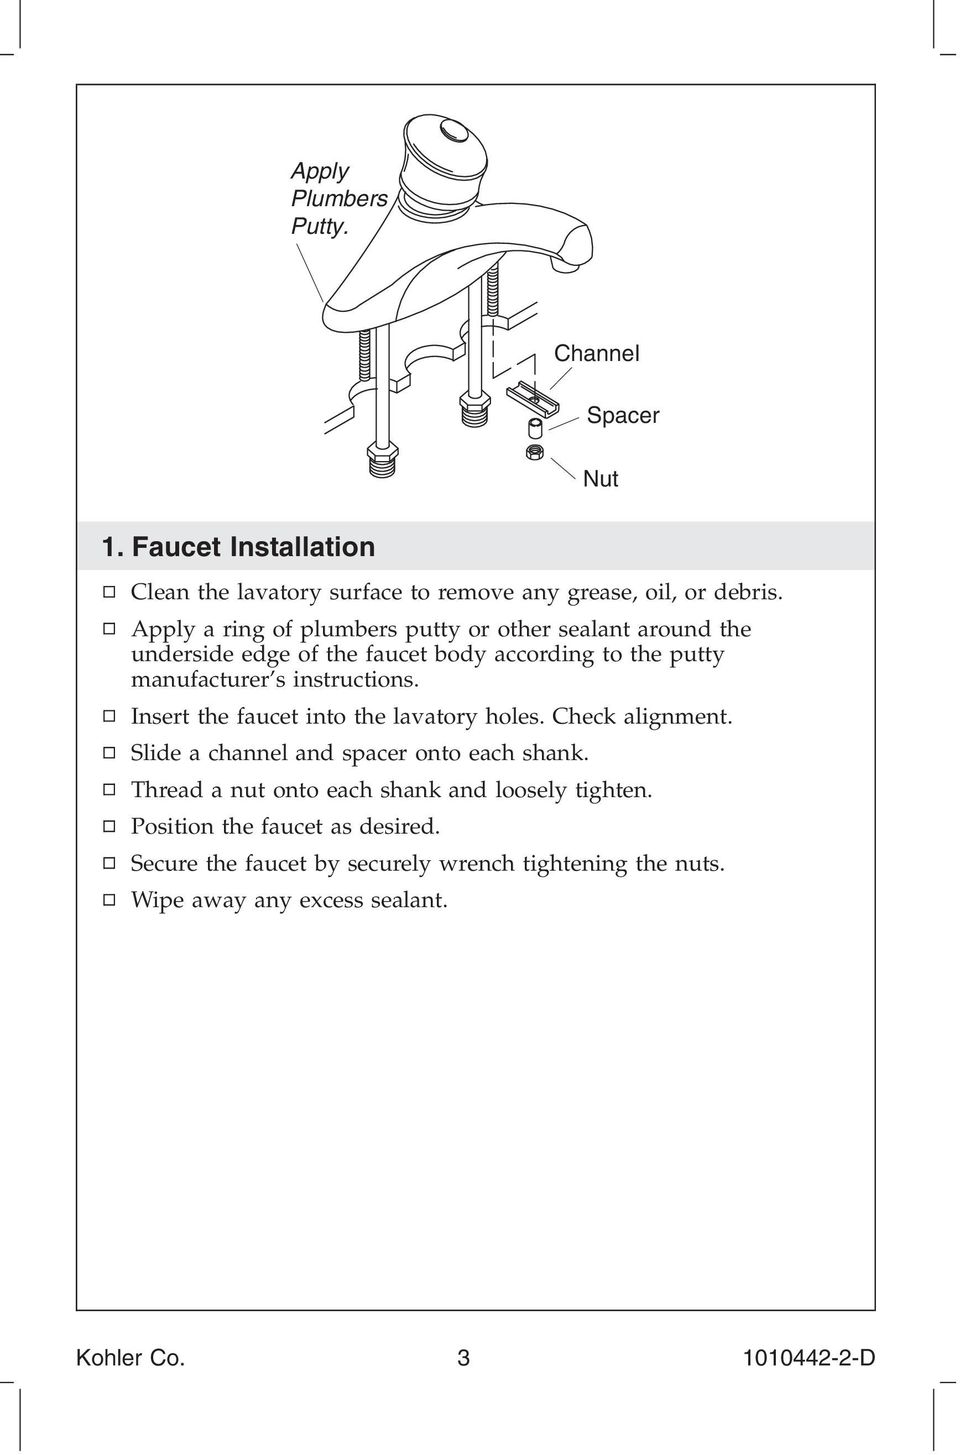 instructions. Insert the faucet into the lavatory holes. Check alignment. Slide a channel and spacer onto each shank.